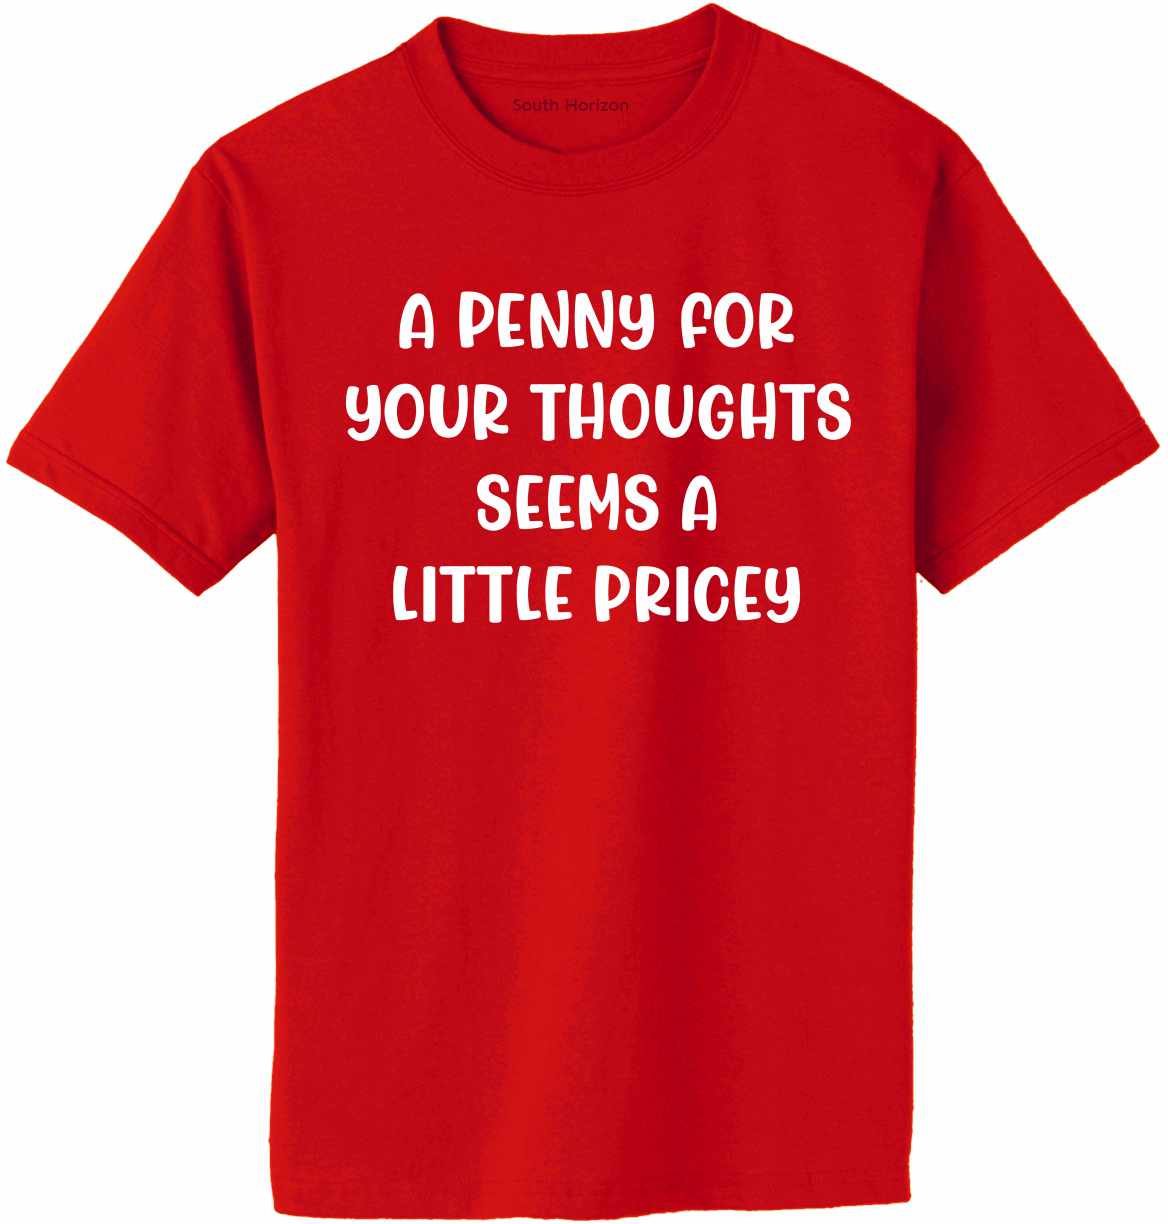 A Penny For Your Thoughts on Adult T-Shirt (#1260-1)